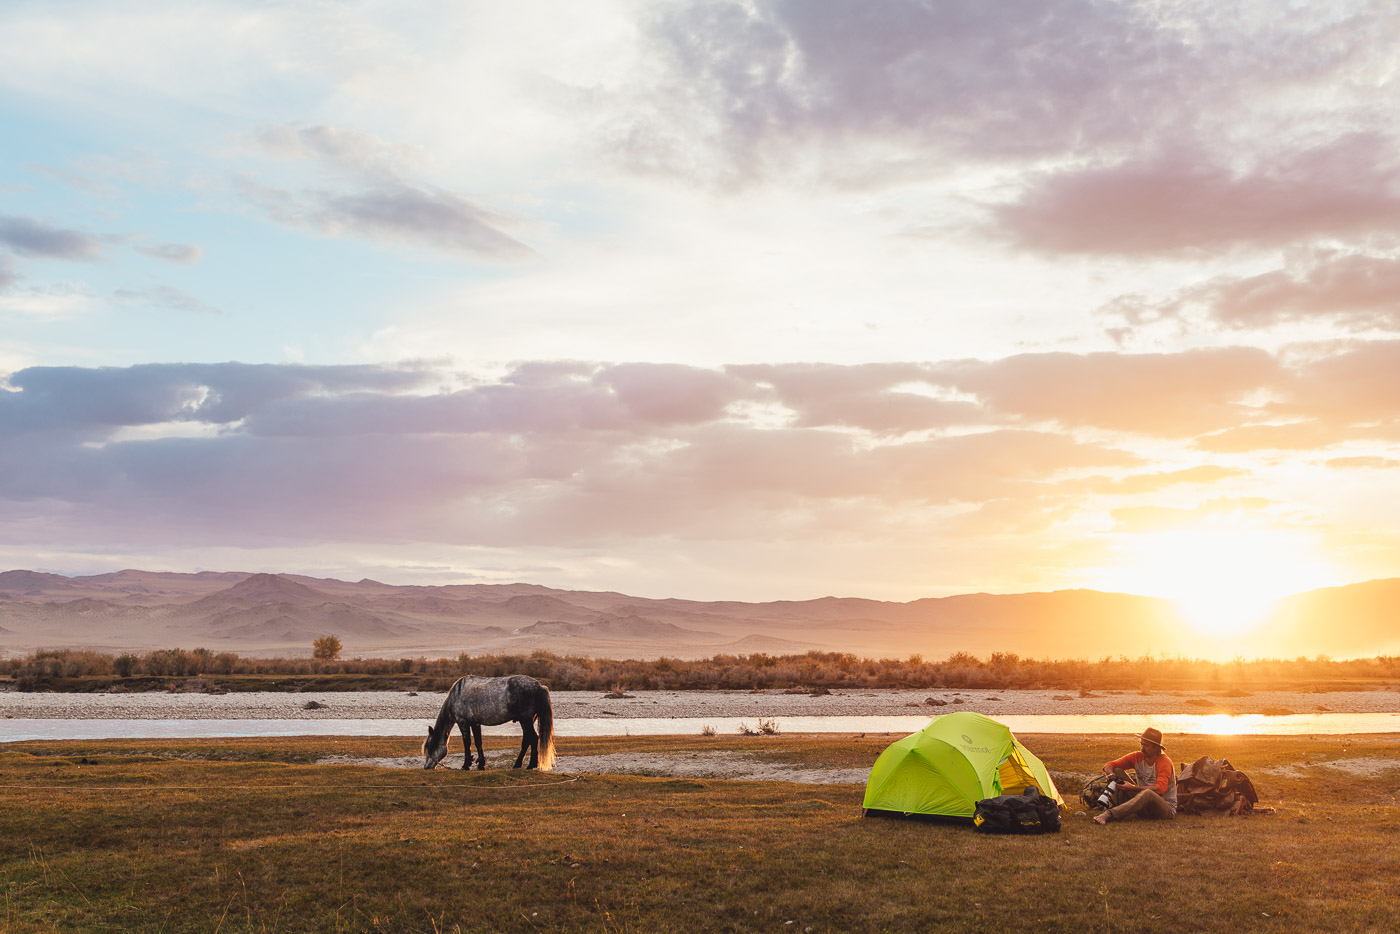 Stefan Haworth camping on a solo horse trekking expedition in Mongolia at sunset